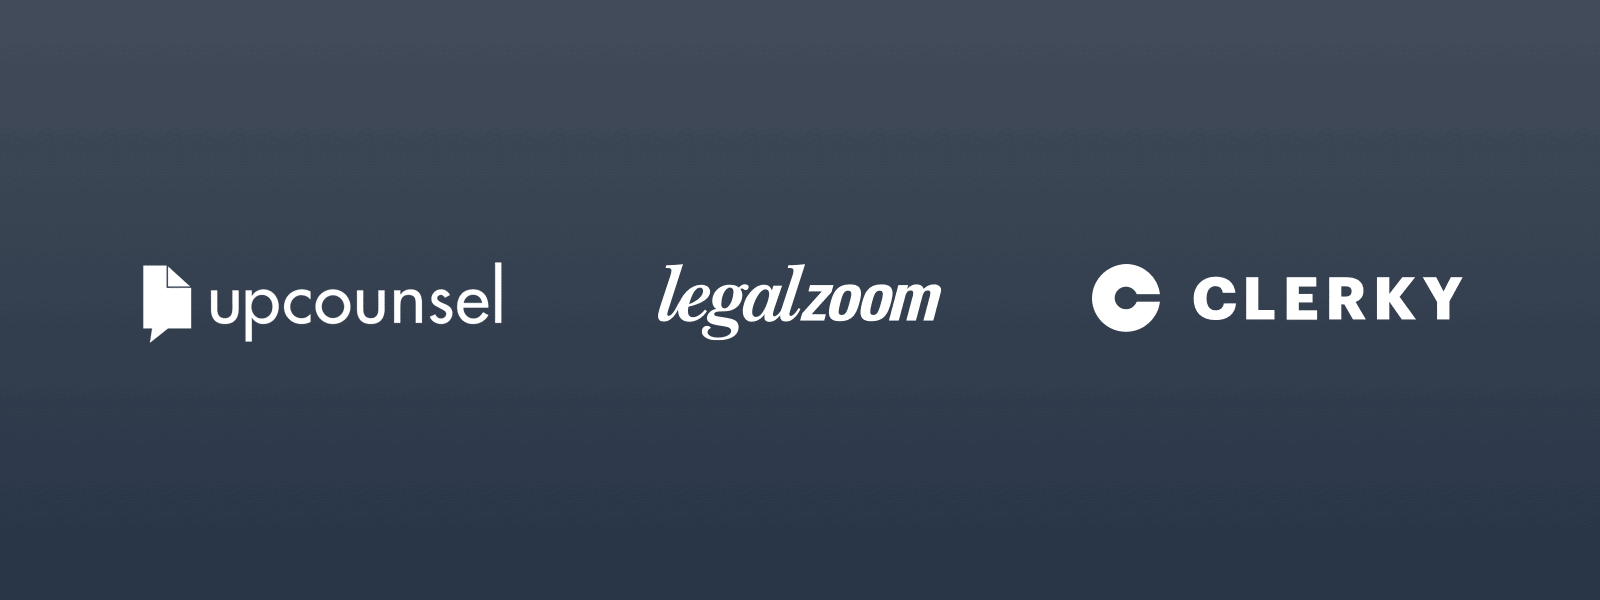 legal zoom login button not working